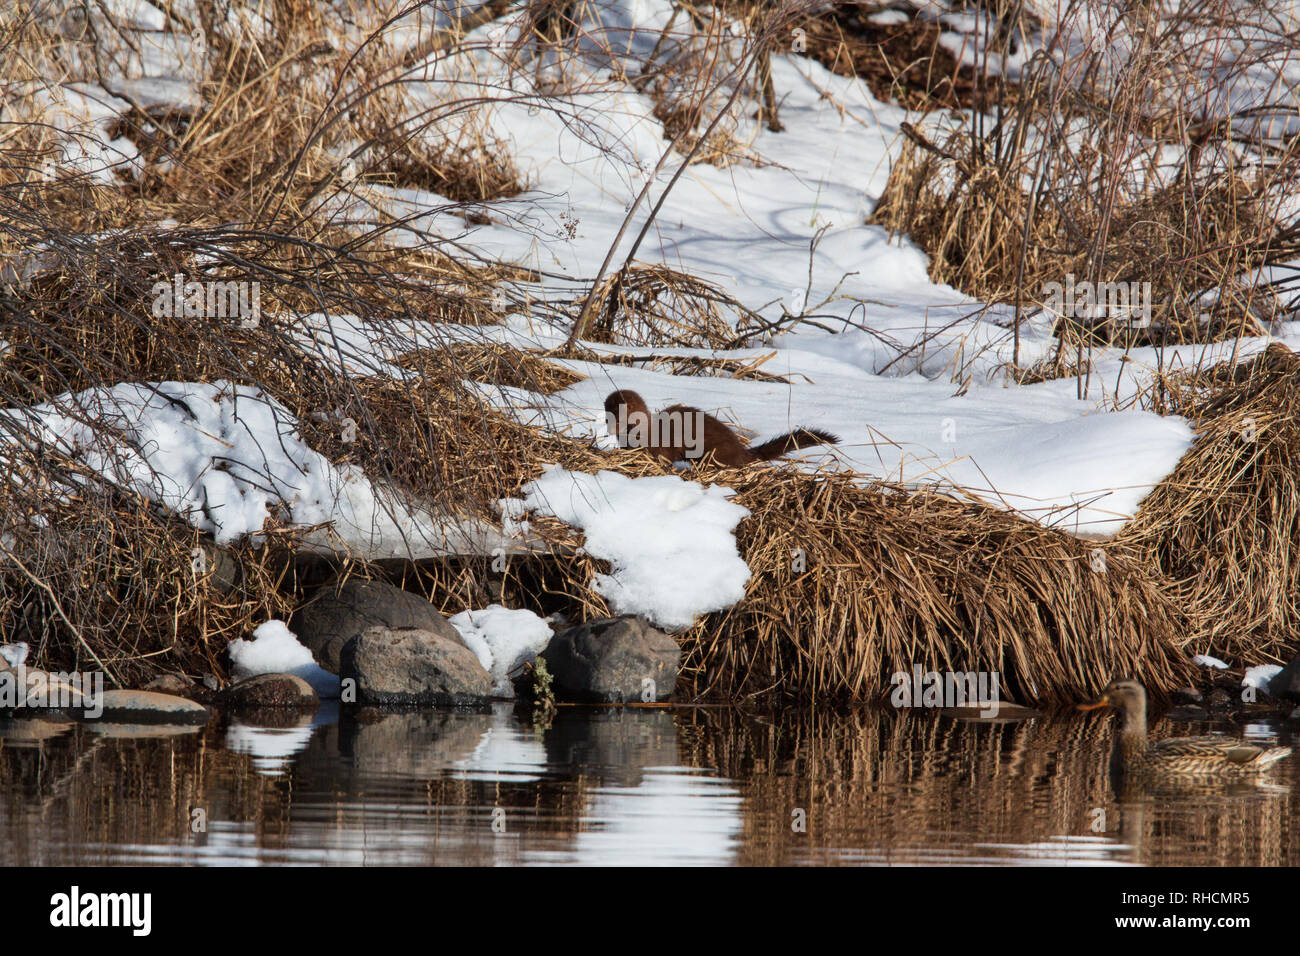 American mink hunting along the banks of the Chippewa River in northern Wisconsin. Stock Photo